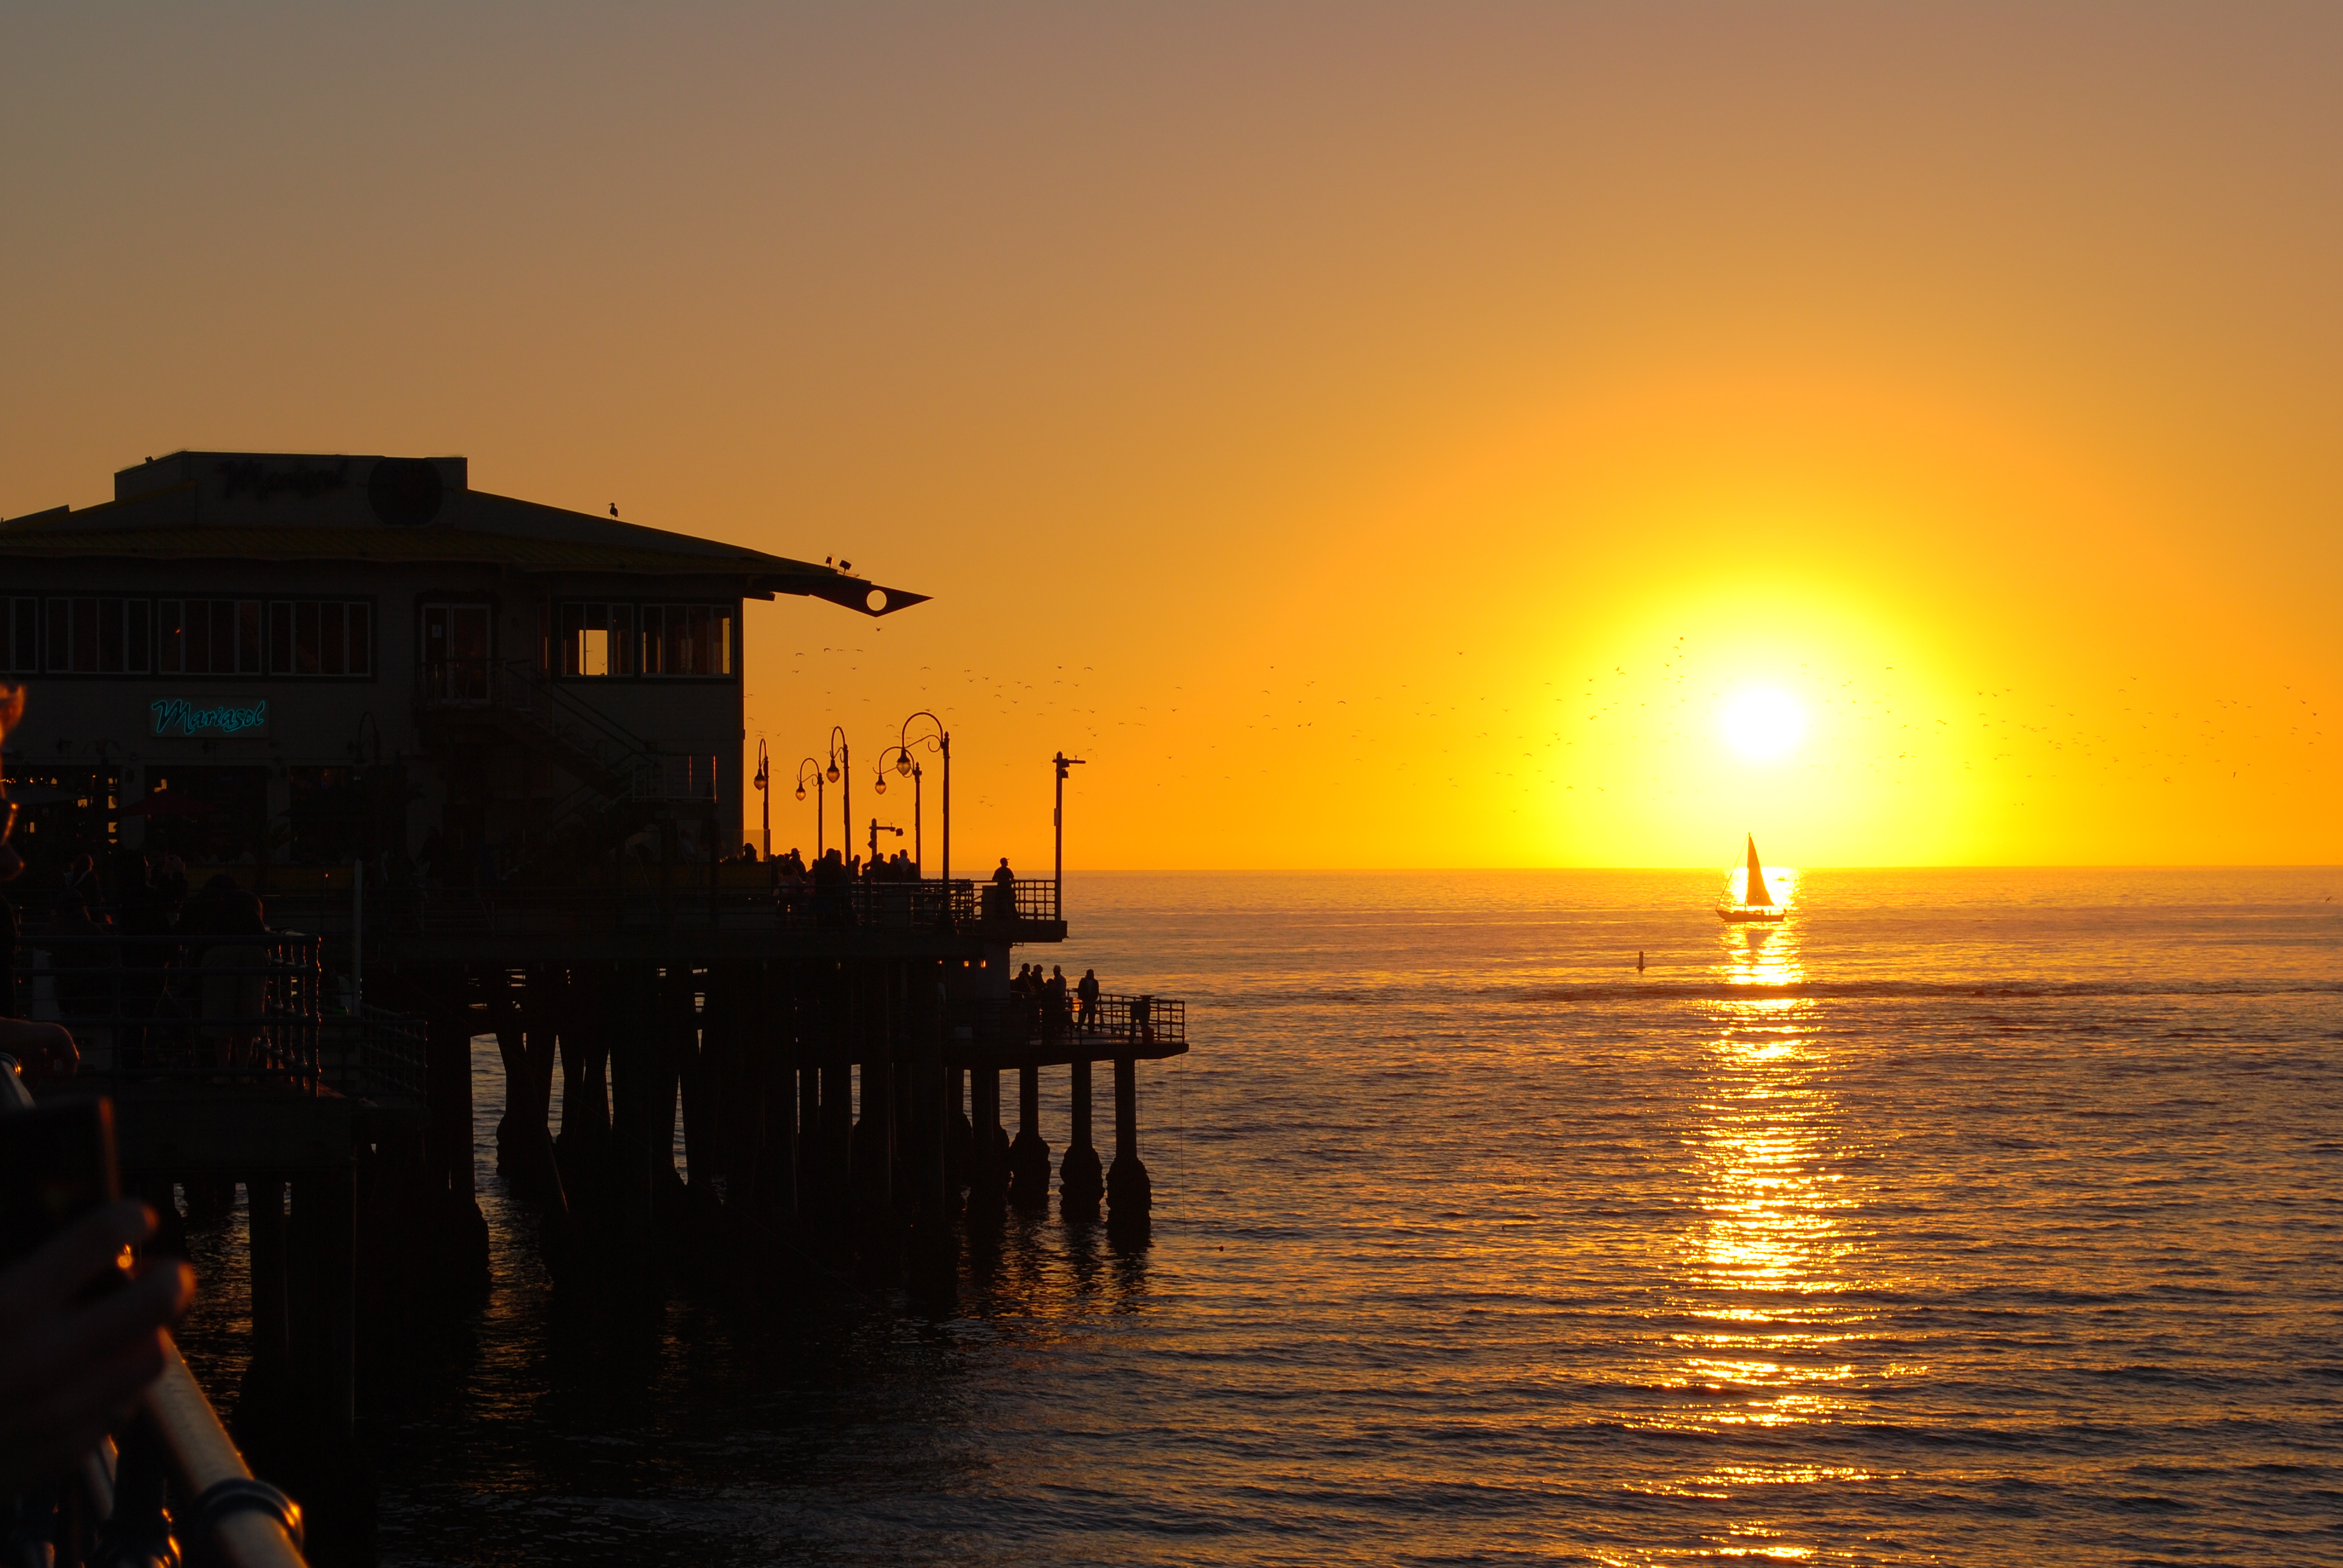 File:Sailboat in Sunset at the Santa Monica Pier.JPG - Wikimedia Commons